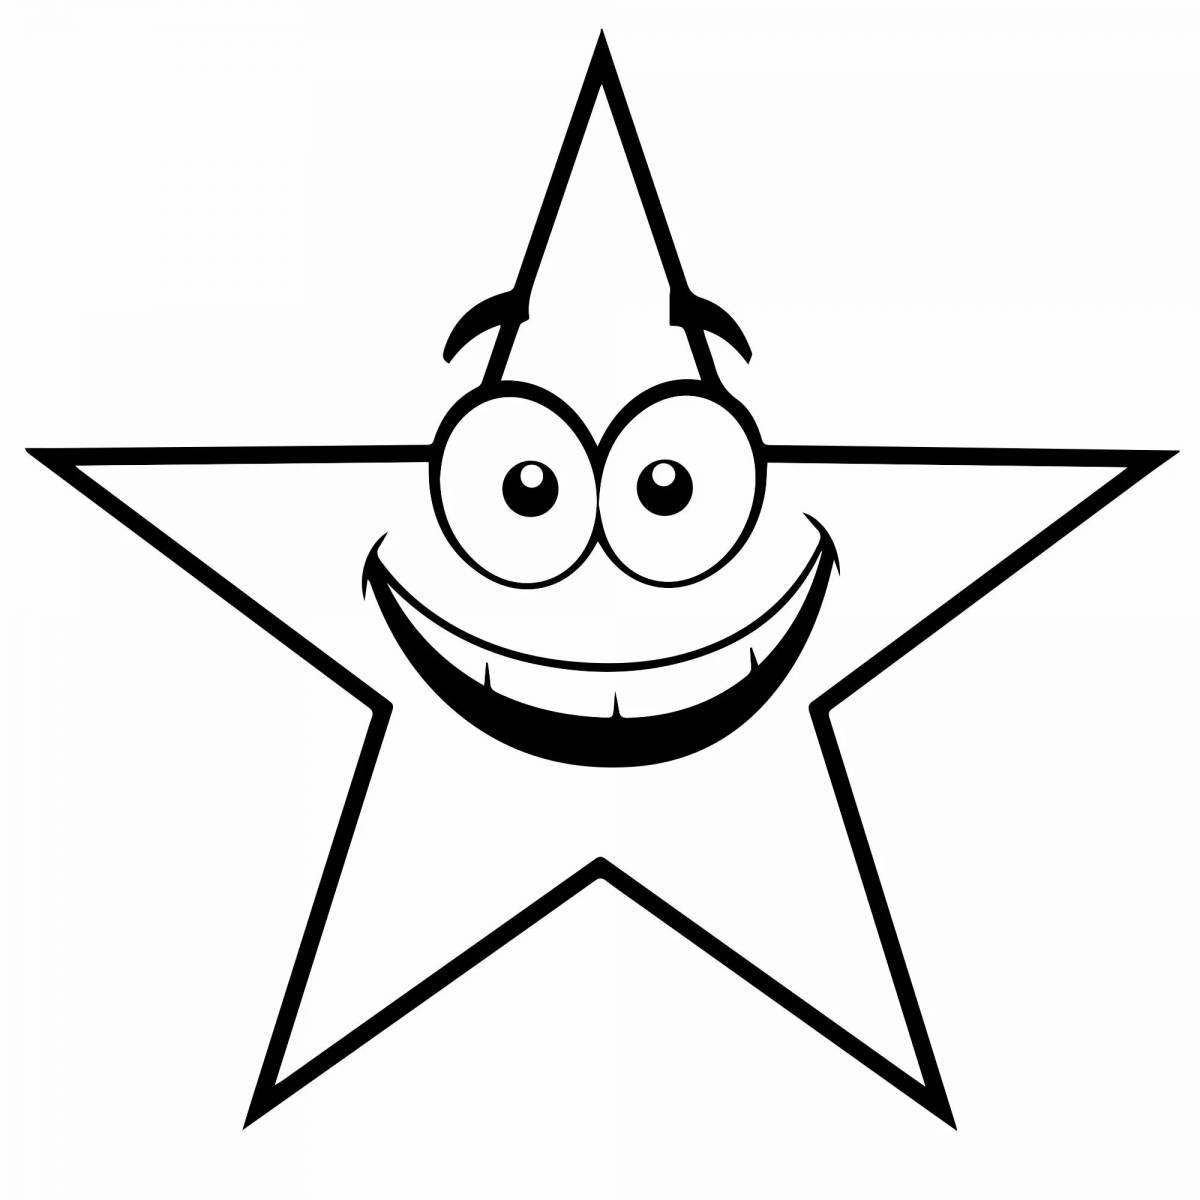 Fun coloring picture star pattern